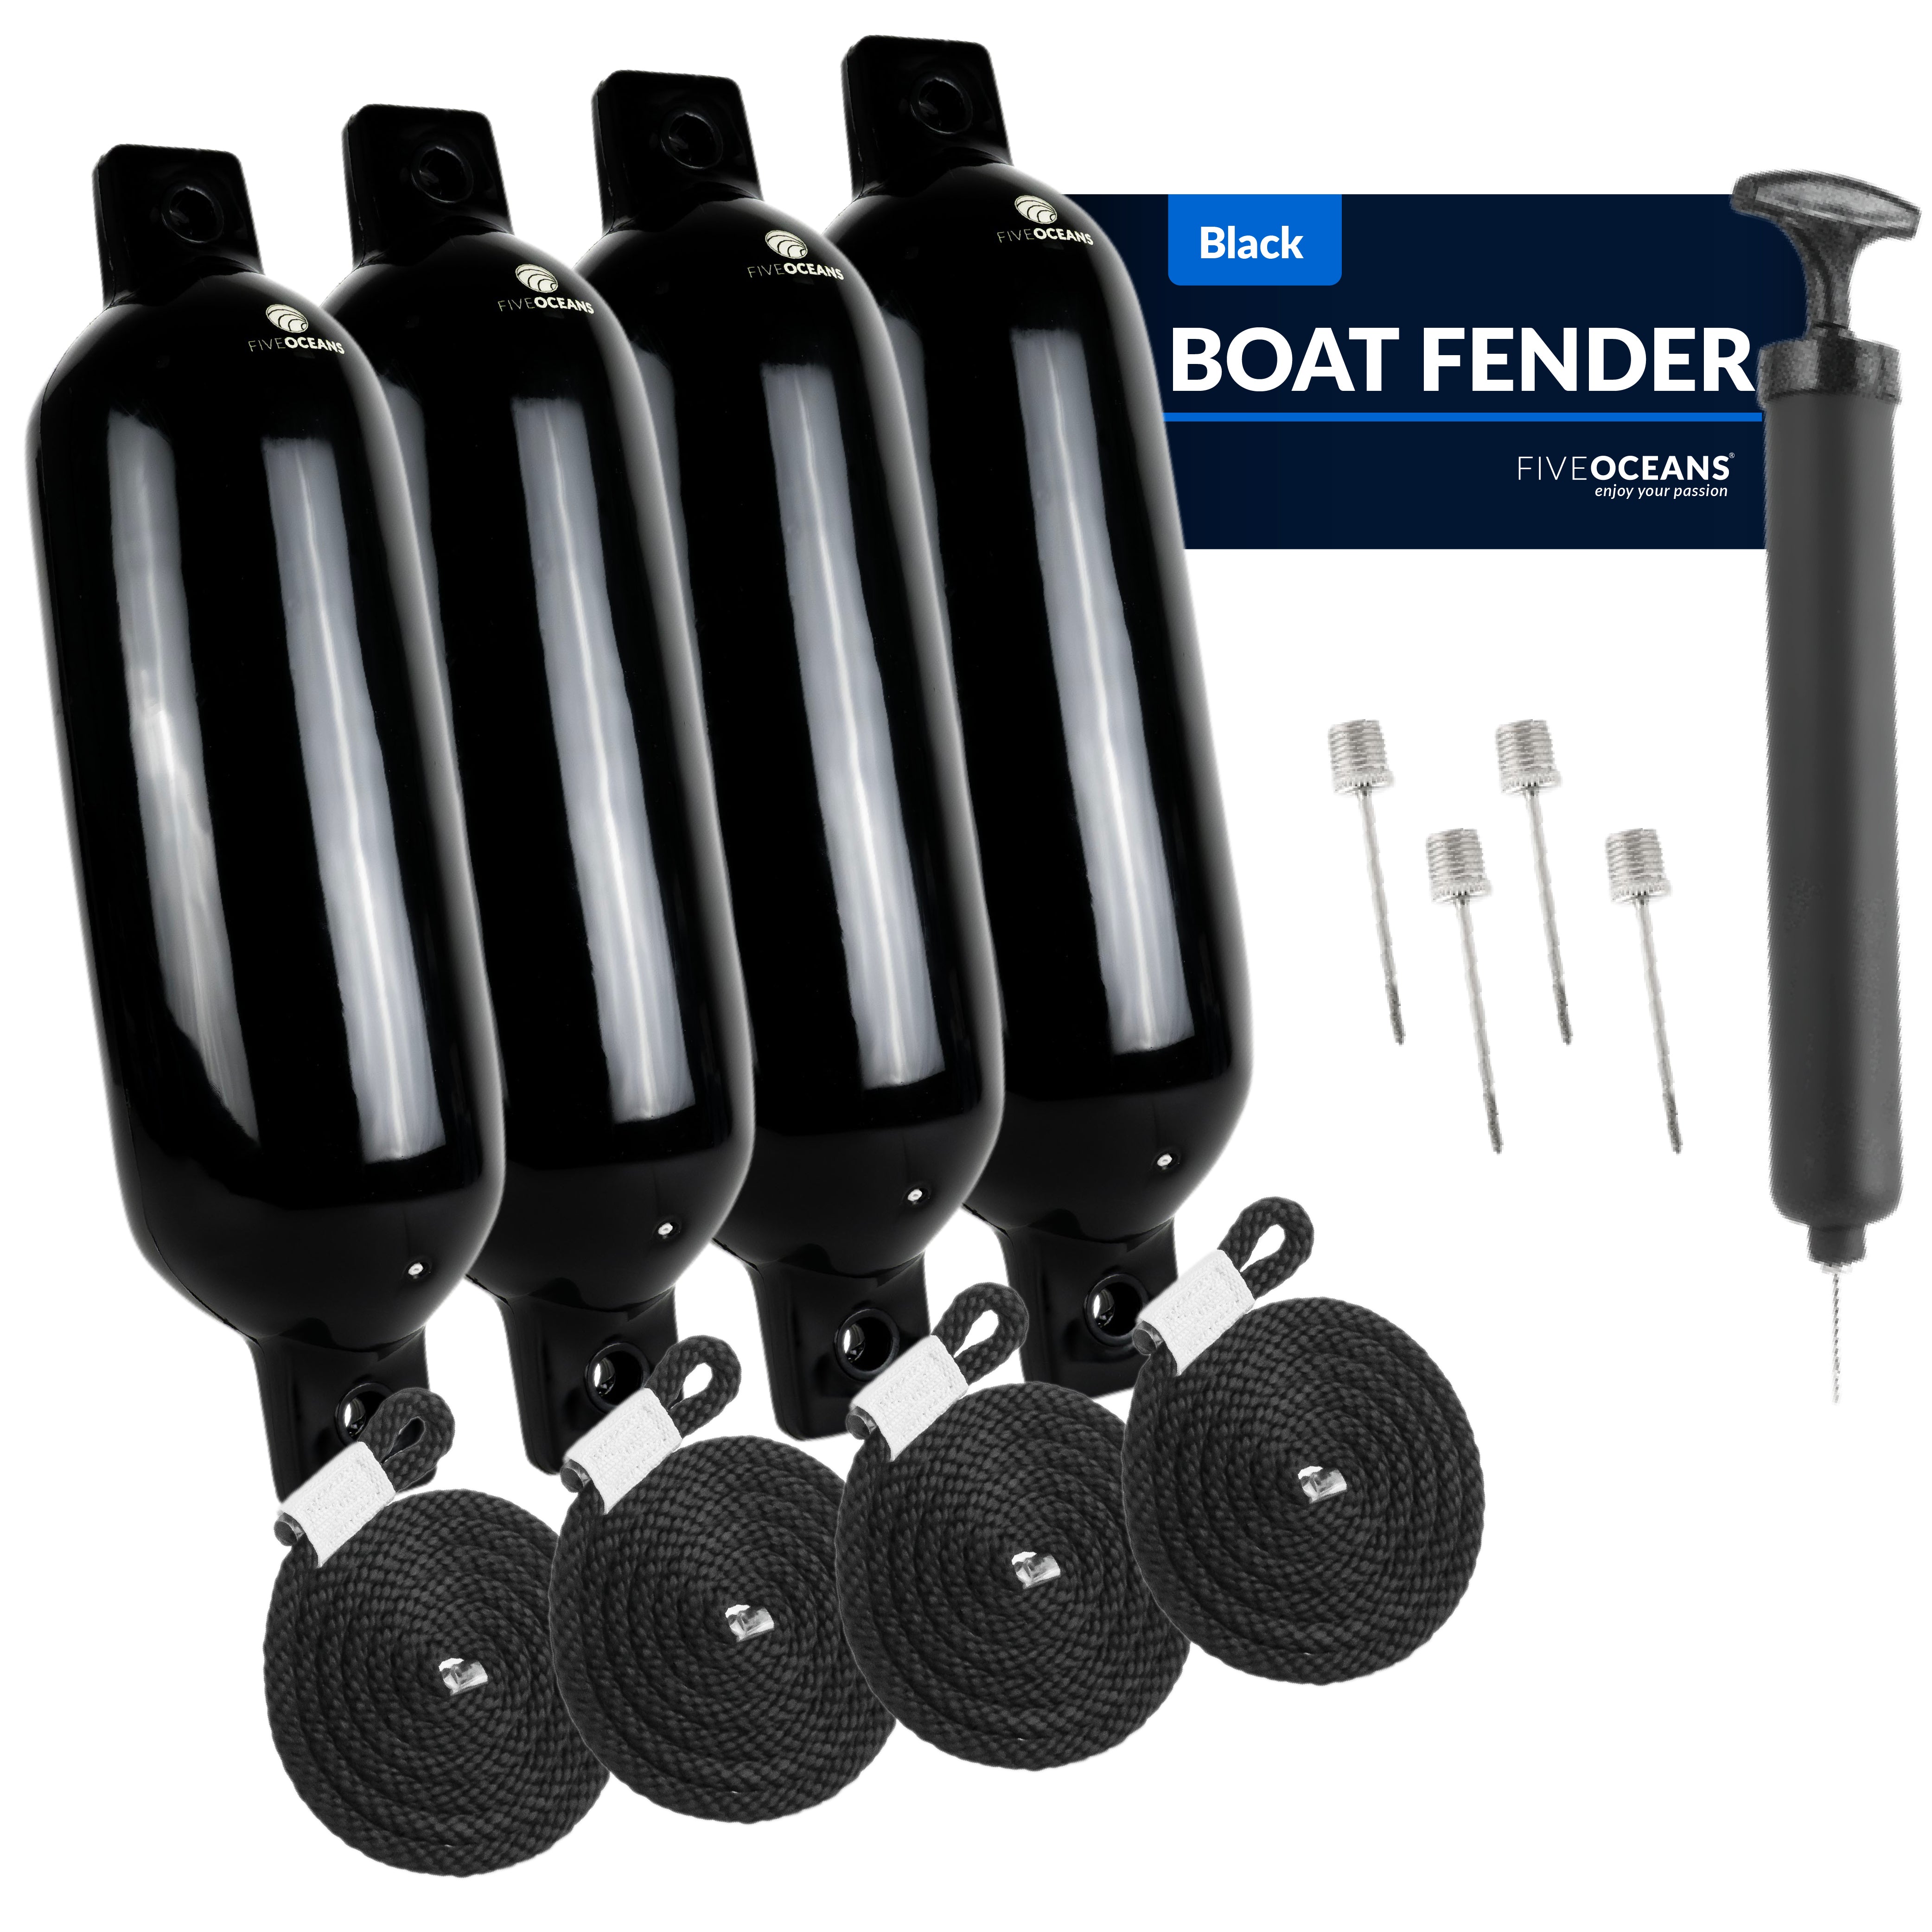 4X Boat Marine Boat Boat Accessories Boat Bumpers Yacht s Bumpers for Fishing  Boats Pontoon Yachts Protection, Black Rope, Boat Fenders -  Canada